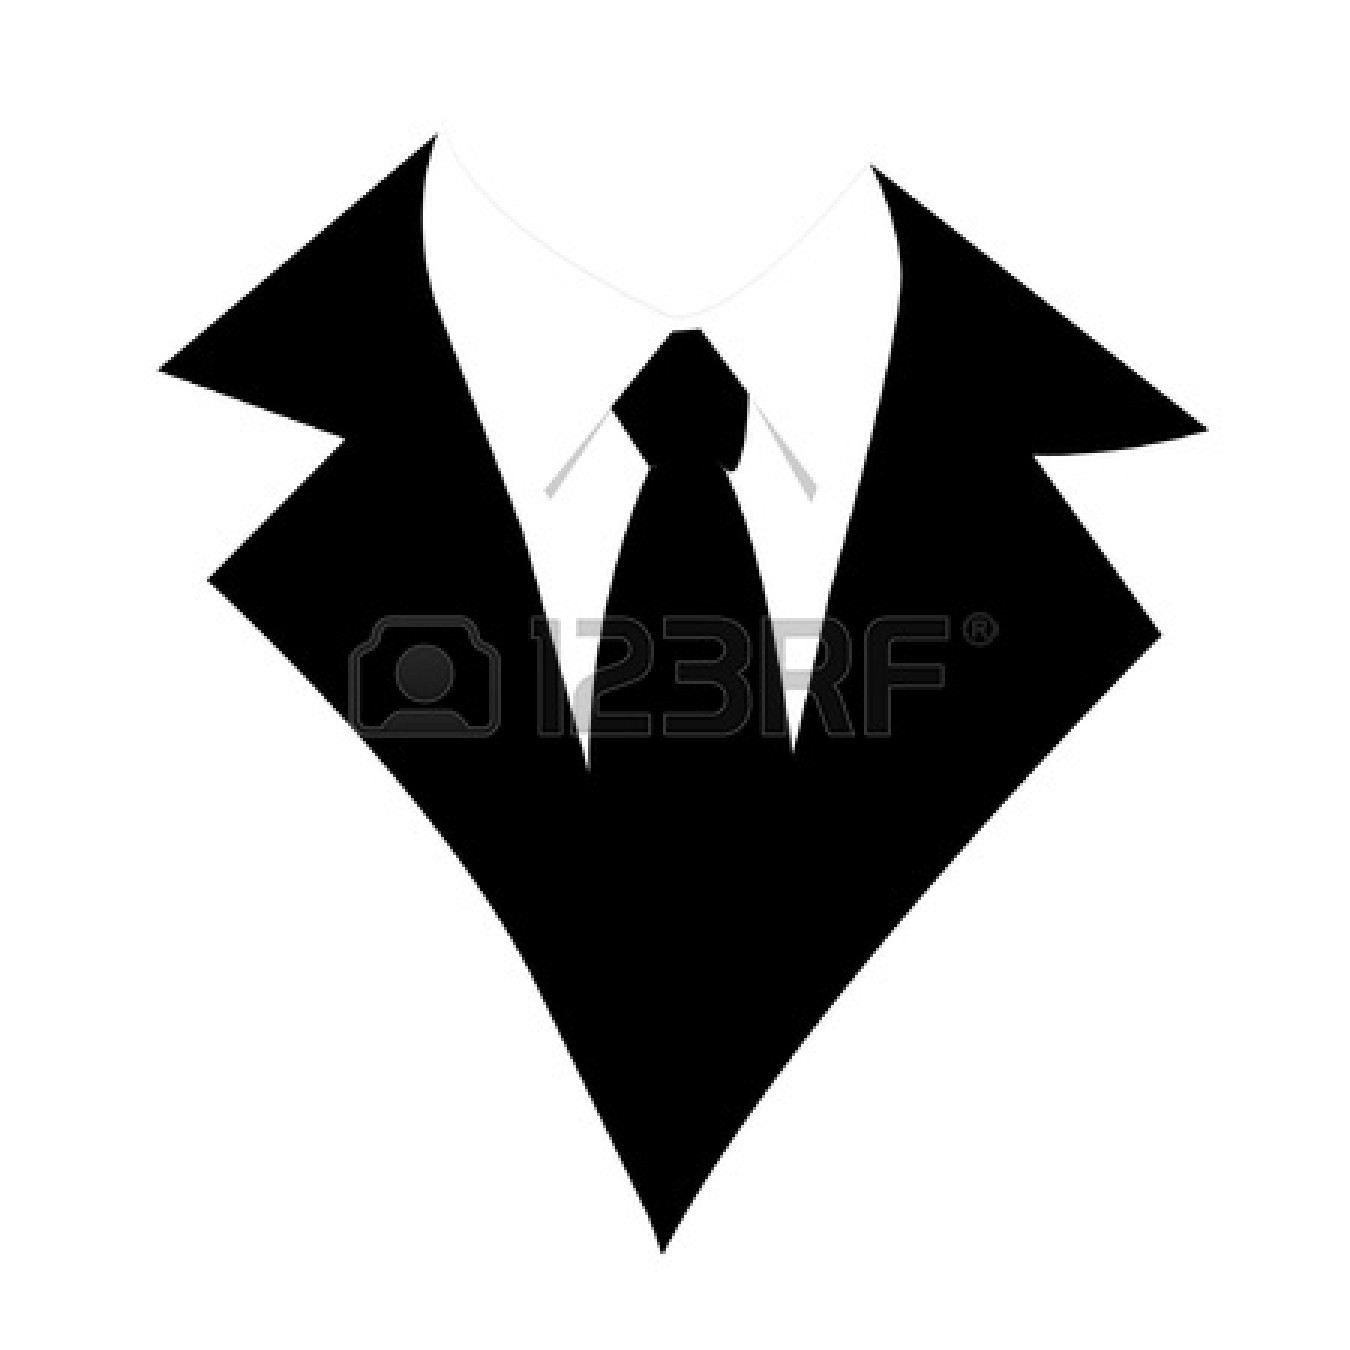 Suit Stock Vector Illustration And Royalty Free Suit Clipart